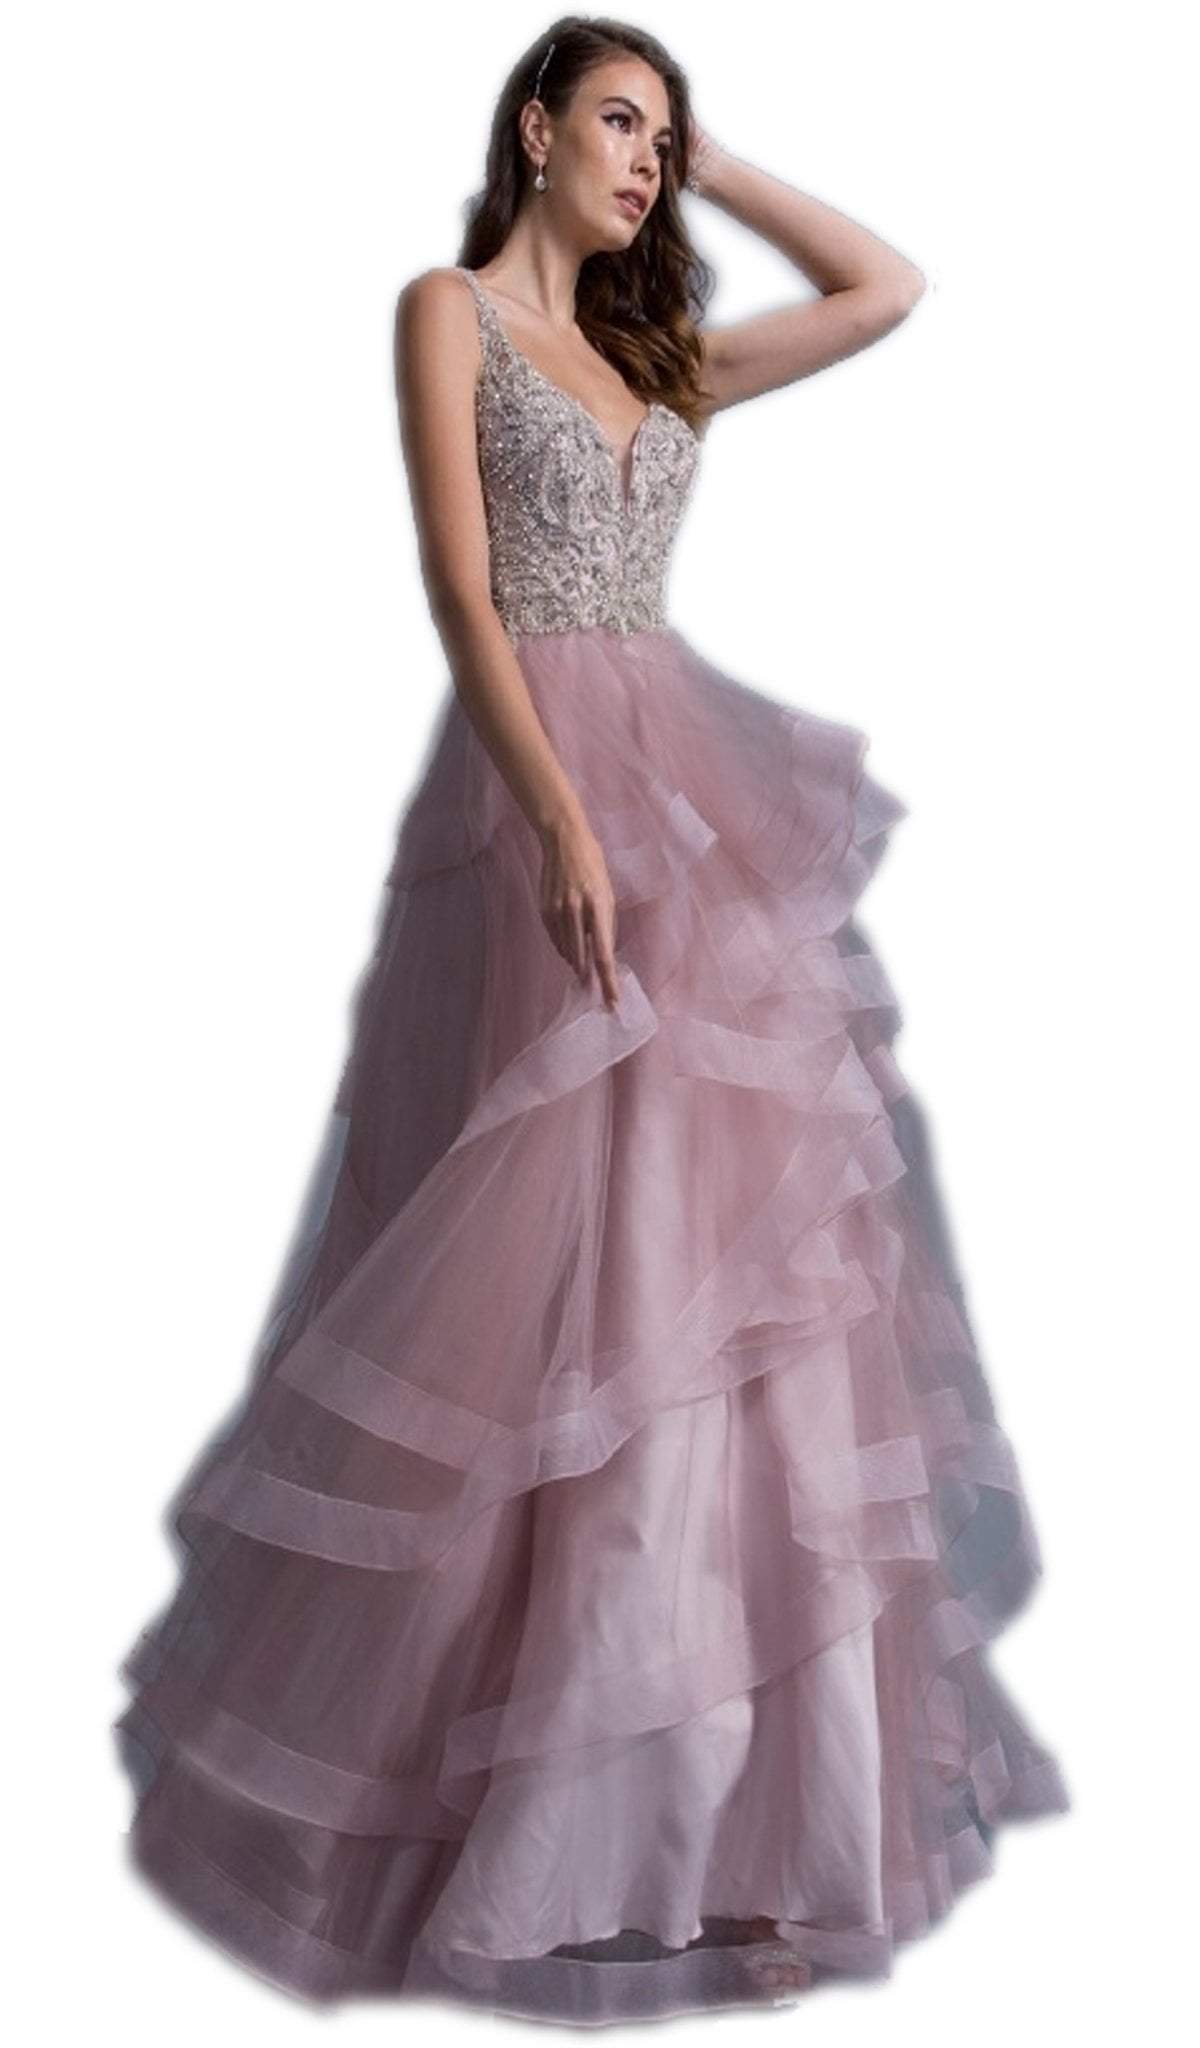 Aspeed Design - Bedazzled V-neck Ruffled A-line Simple Prom Dress
